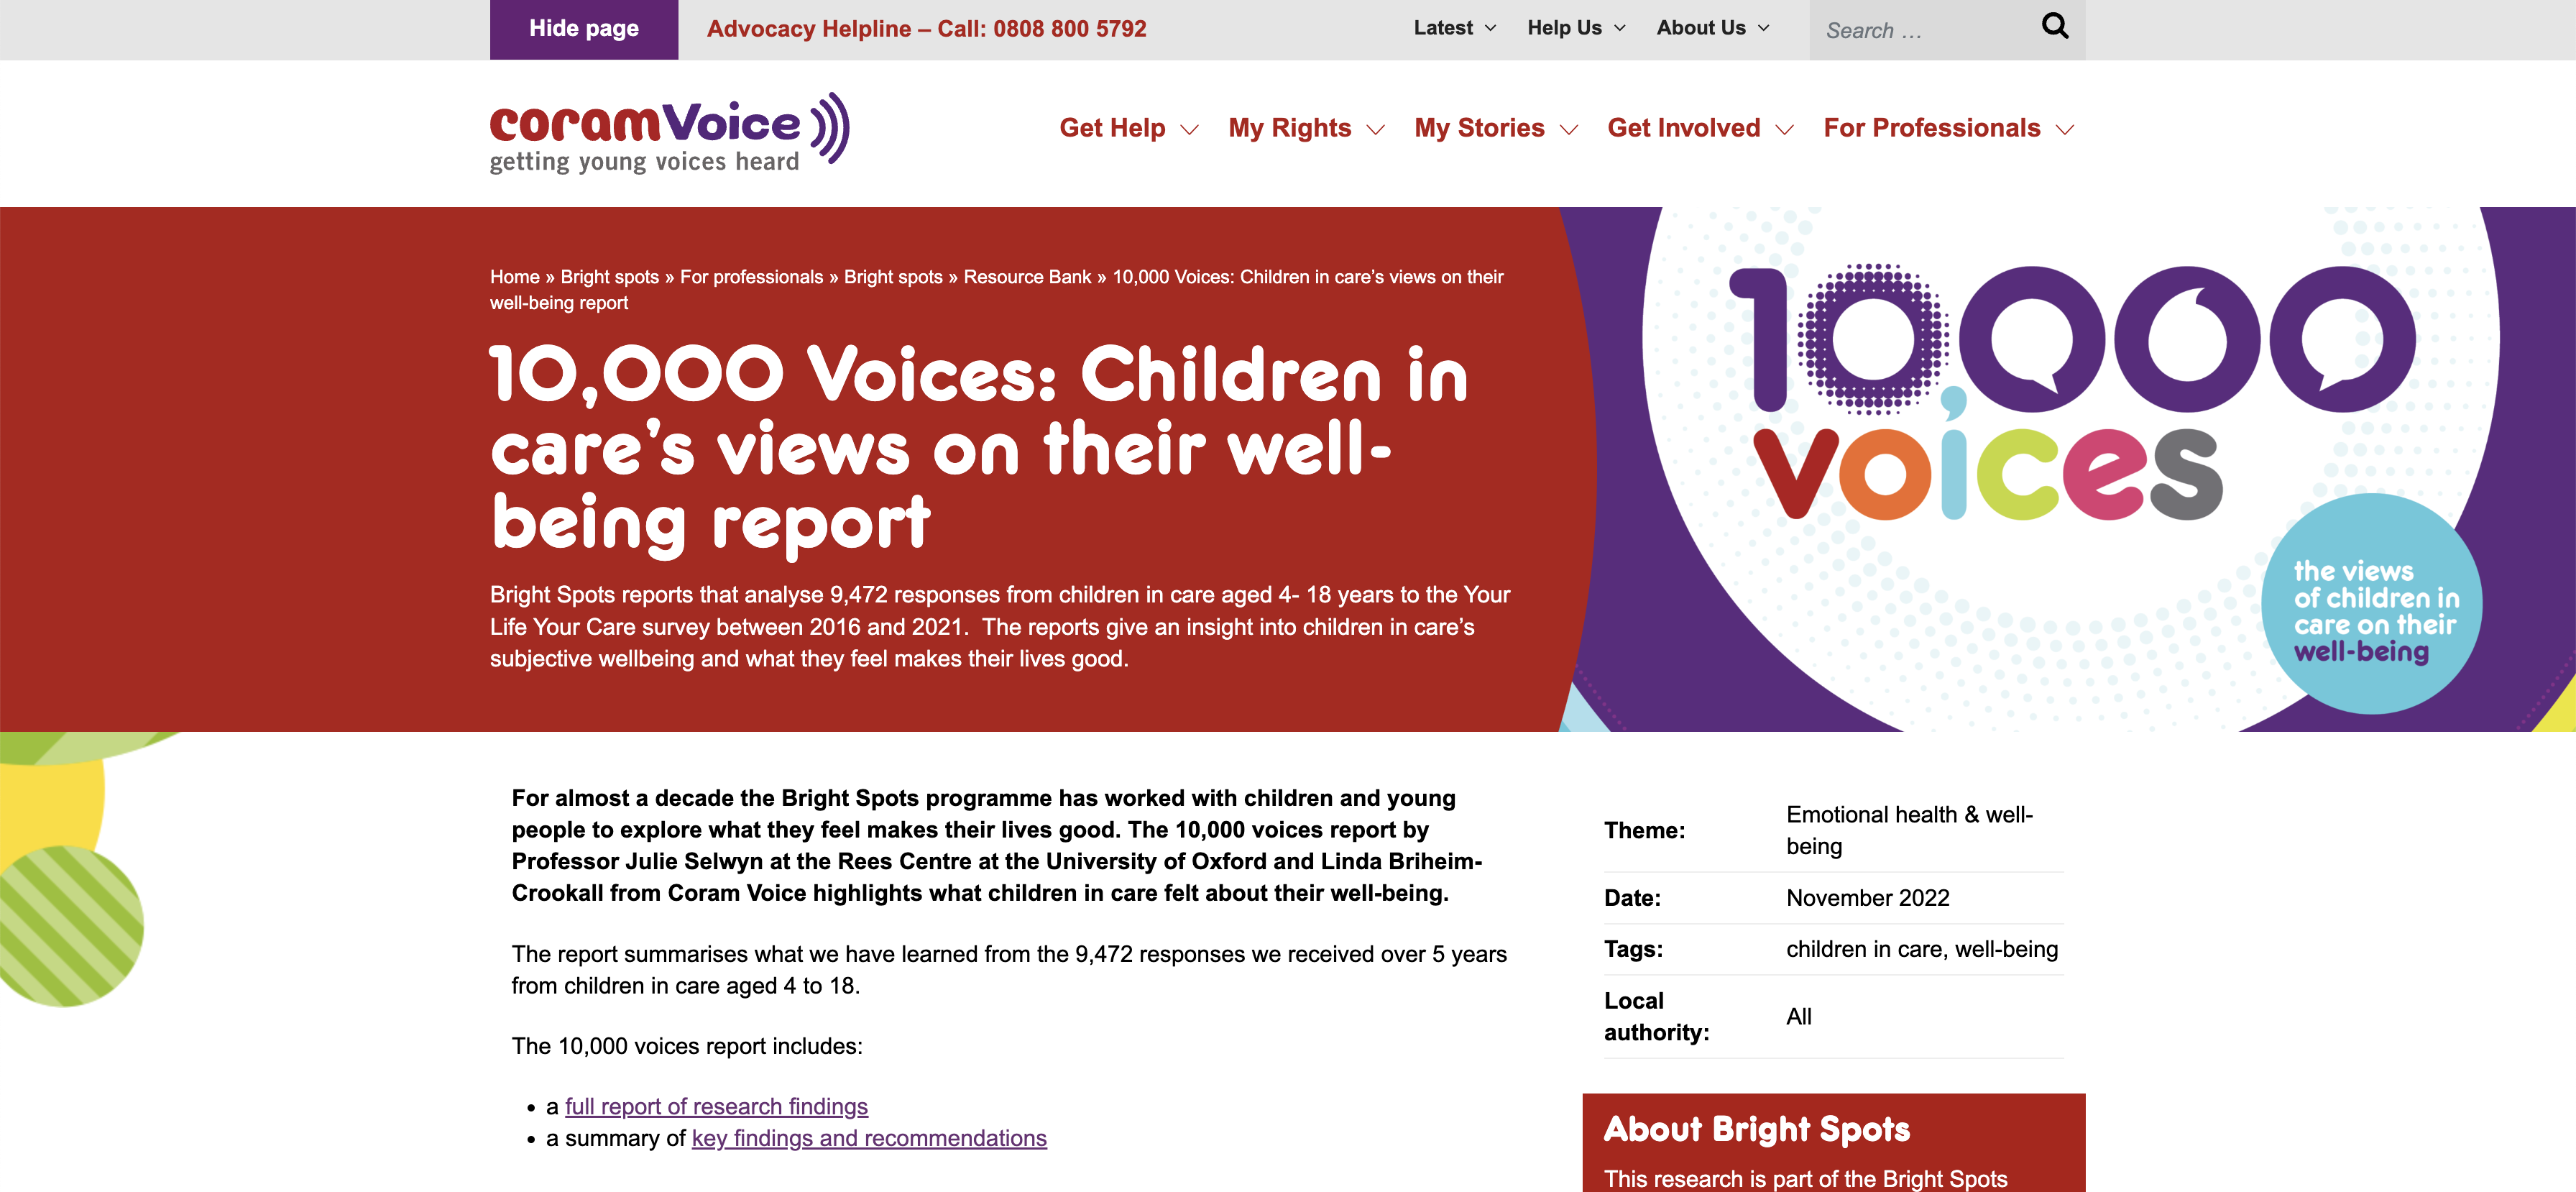 coram voices: 10,000 Voices: Children in care’s views on their well-being report